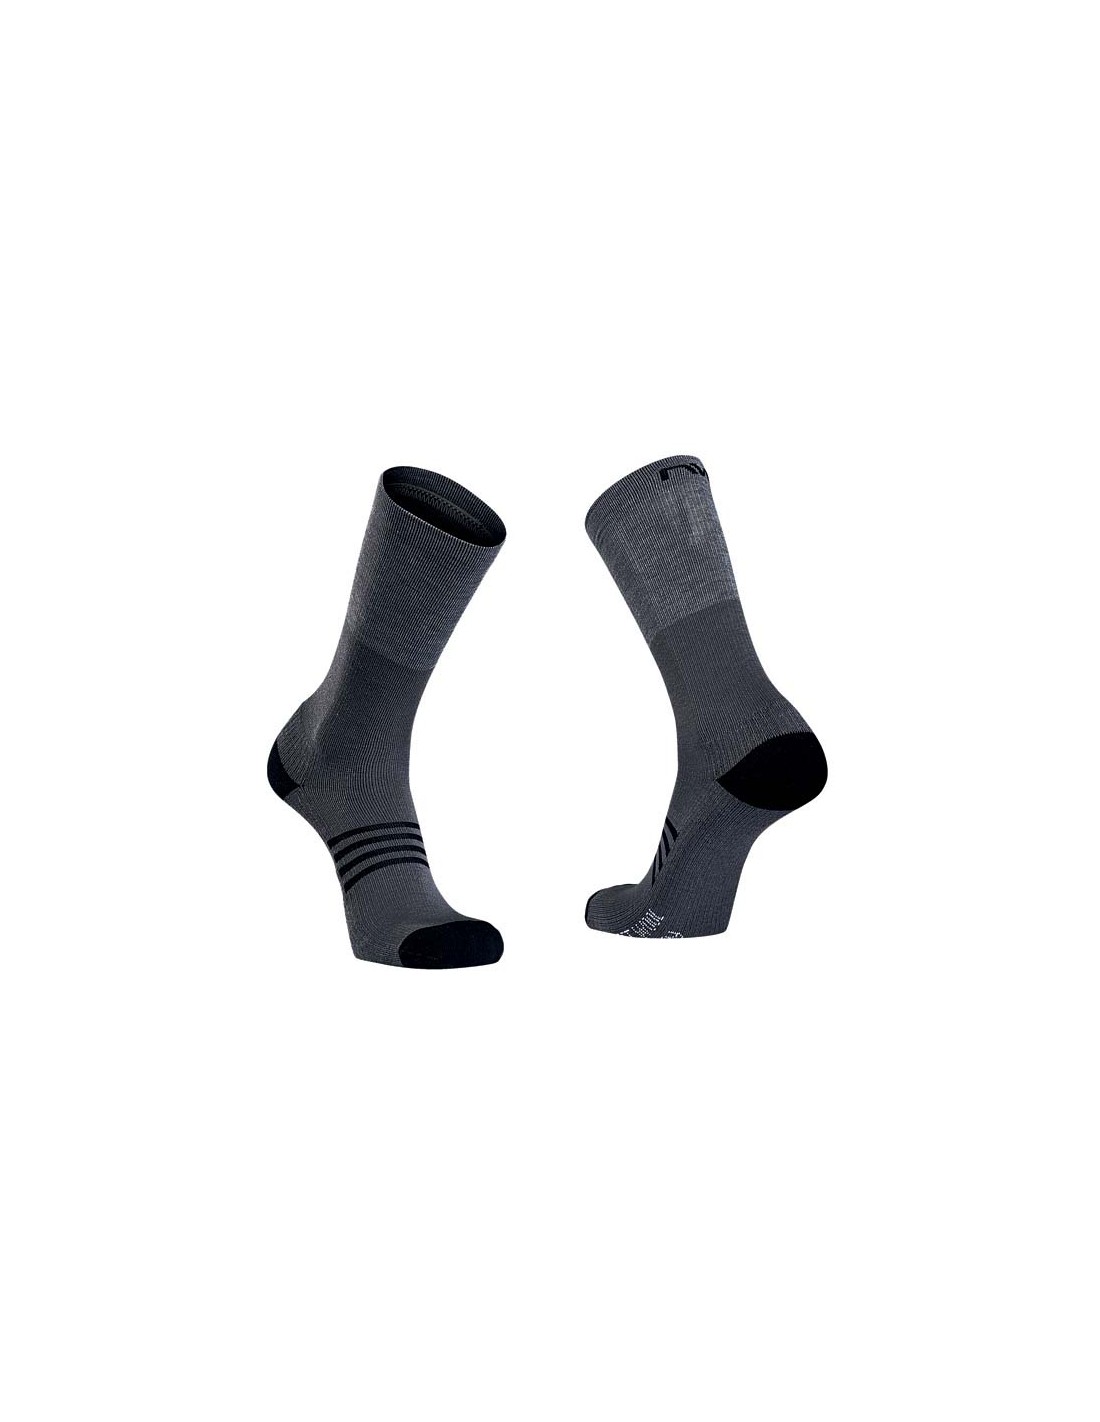 Details about   NORTHWAVE Calcetin Extreme Pro BLACK-LIME NW21C8921201505 Footwear Socks Long 